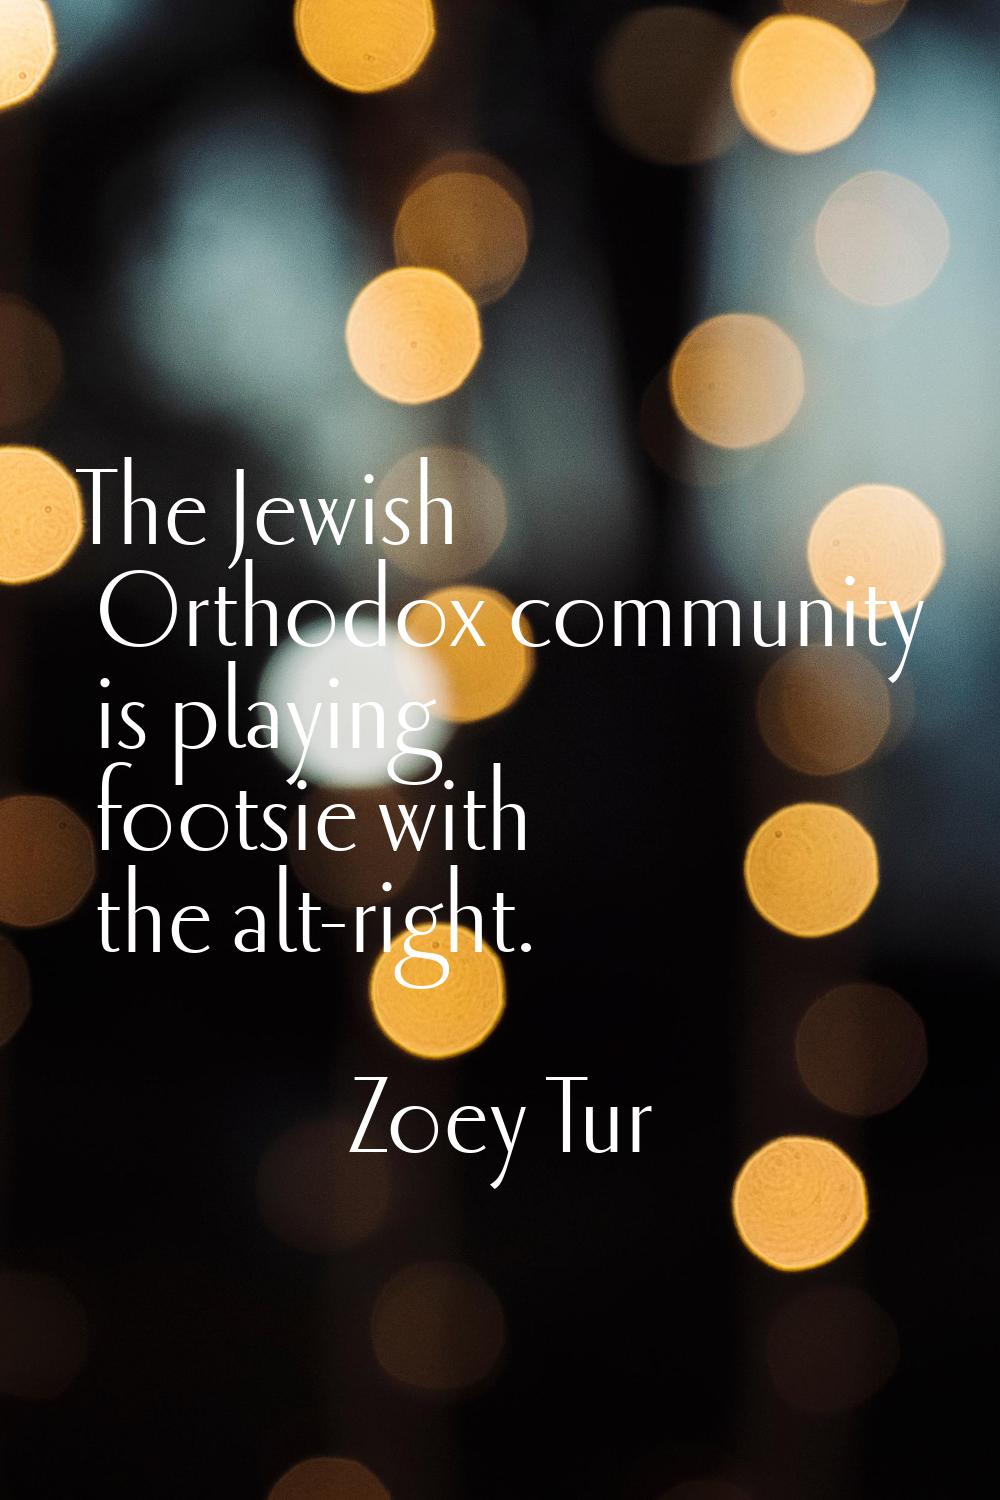 The Jewish Orthodox community is playing footsie with the alt-right.